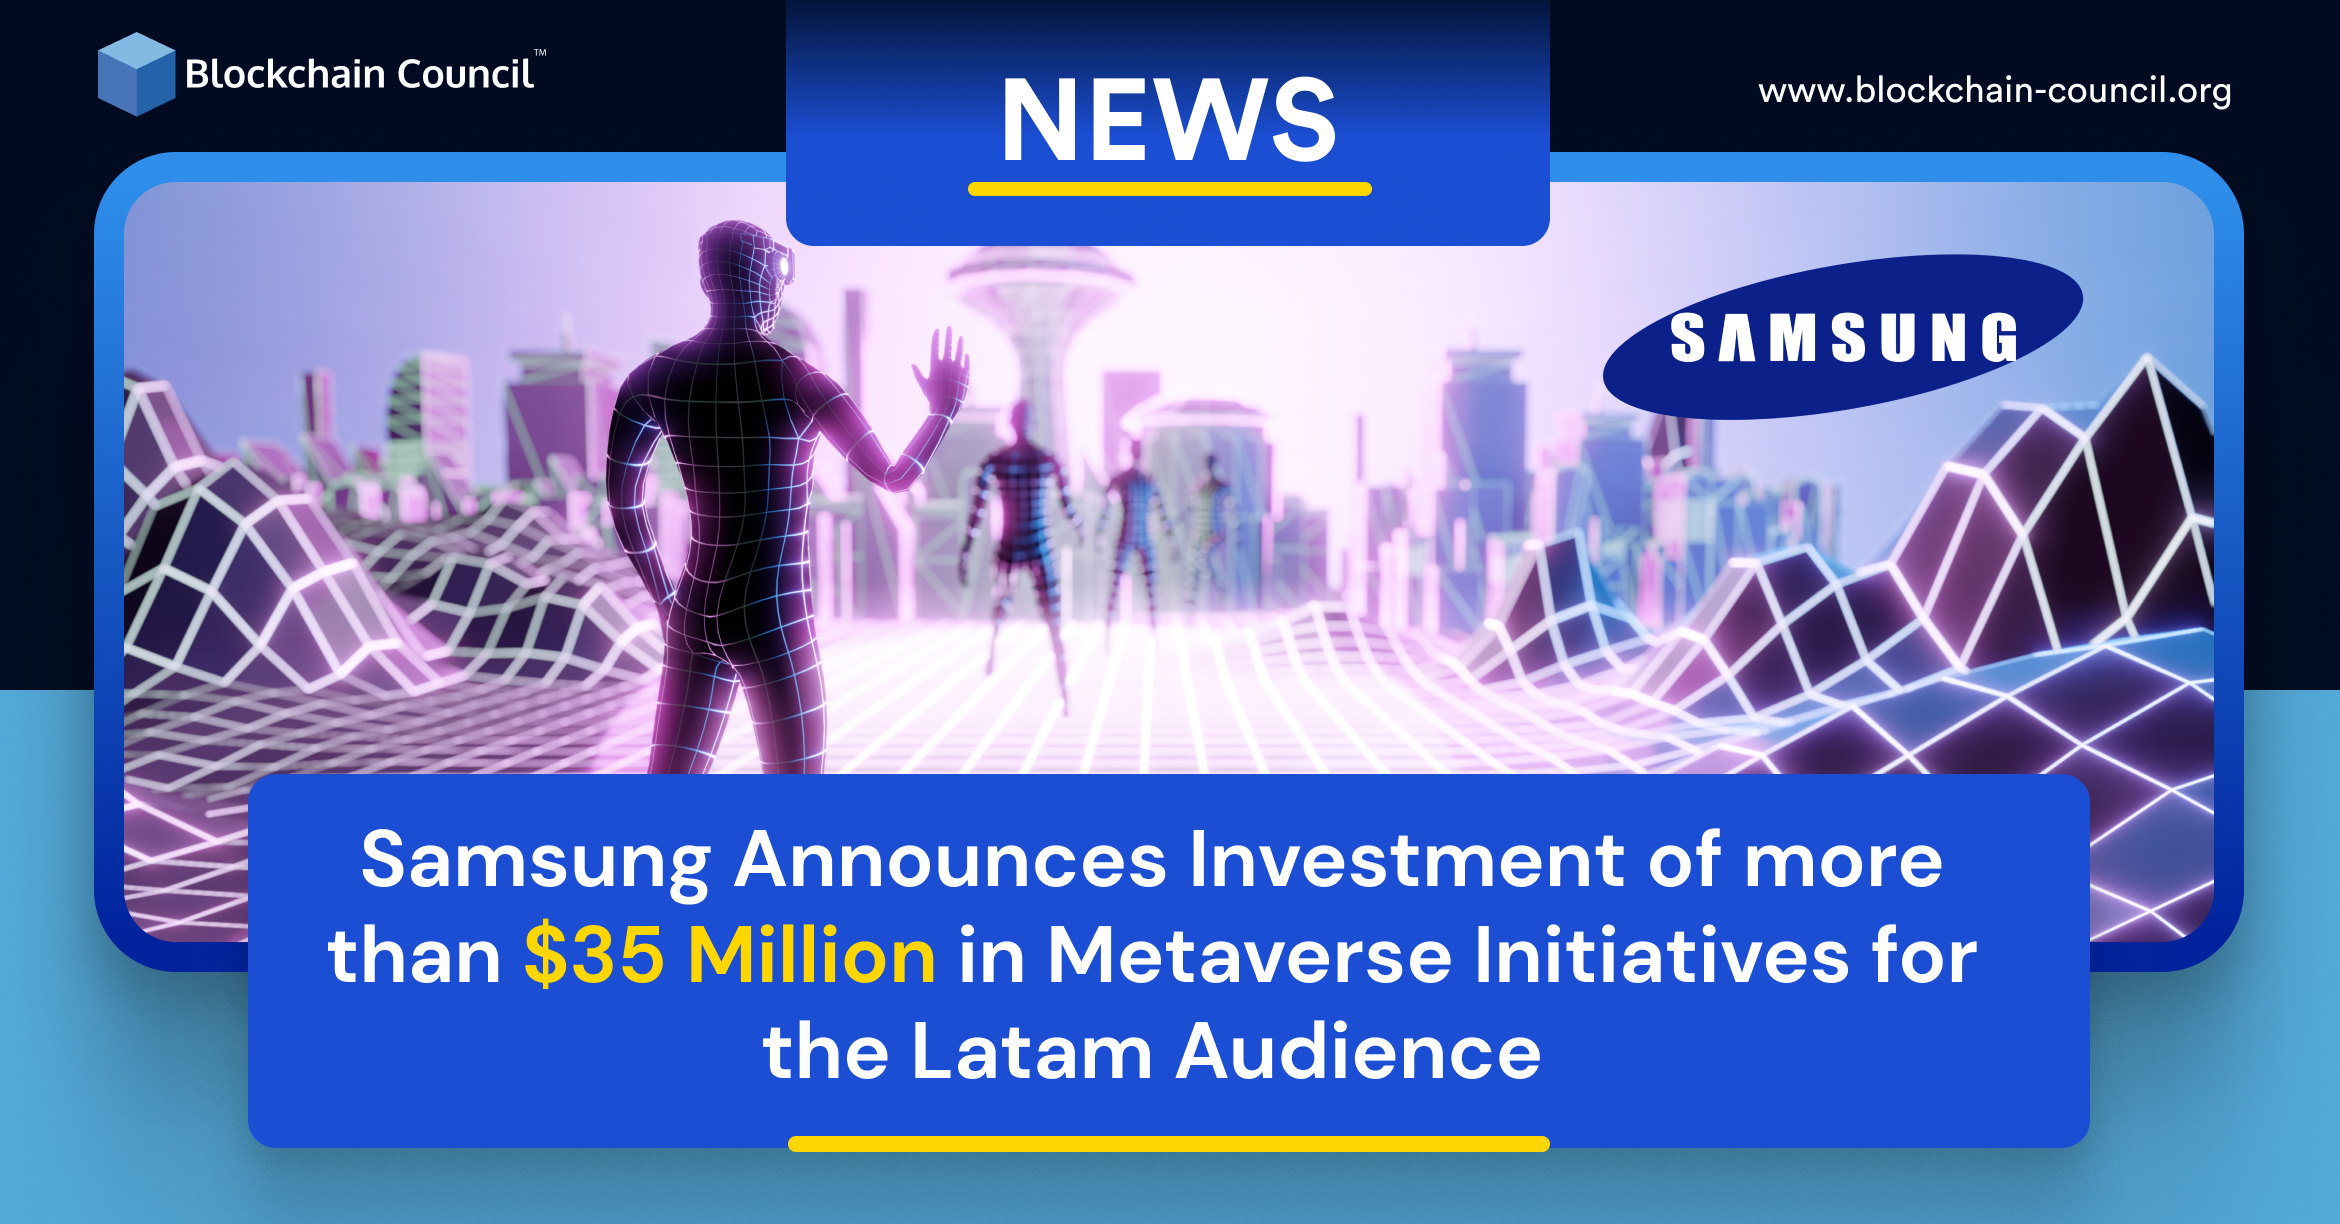 Samsung Is Investing More Than $35 Million Dollars In Metaverse Initiatives For The Latam Audience